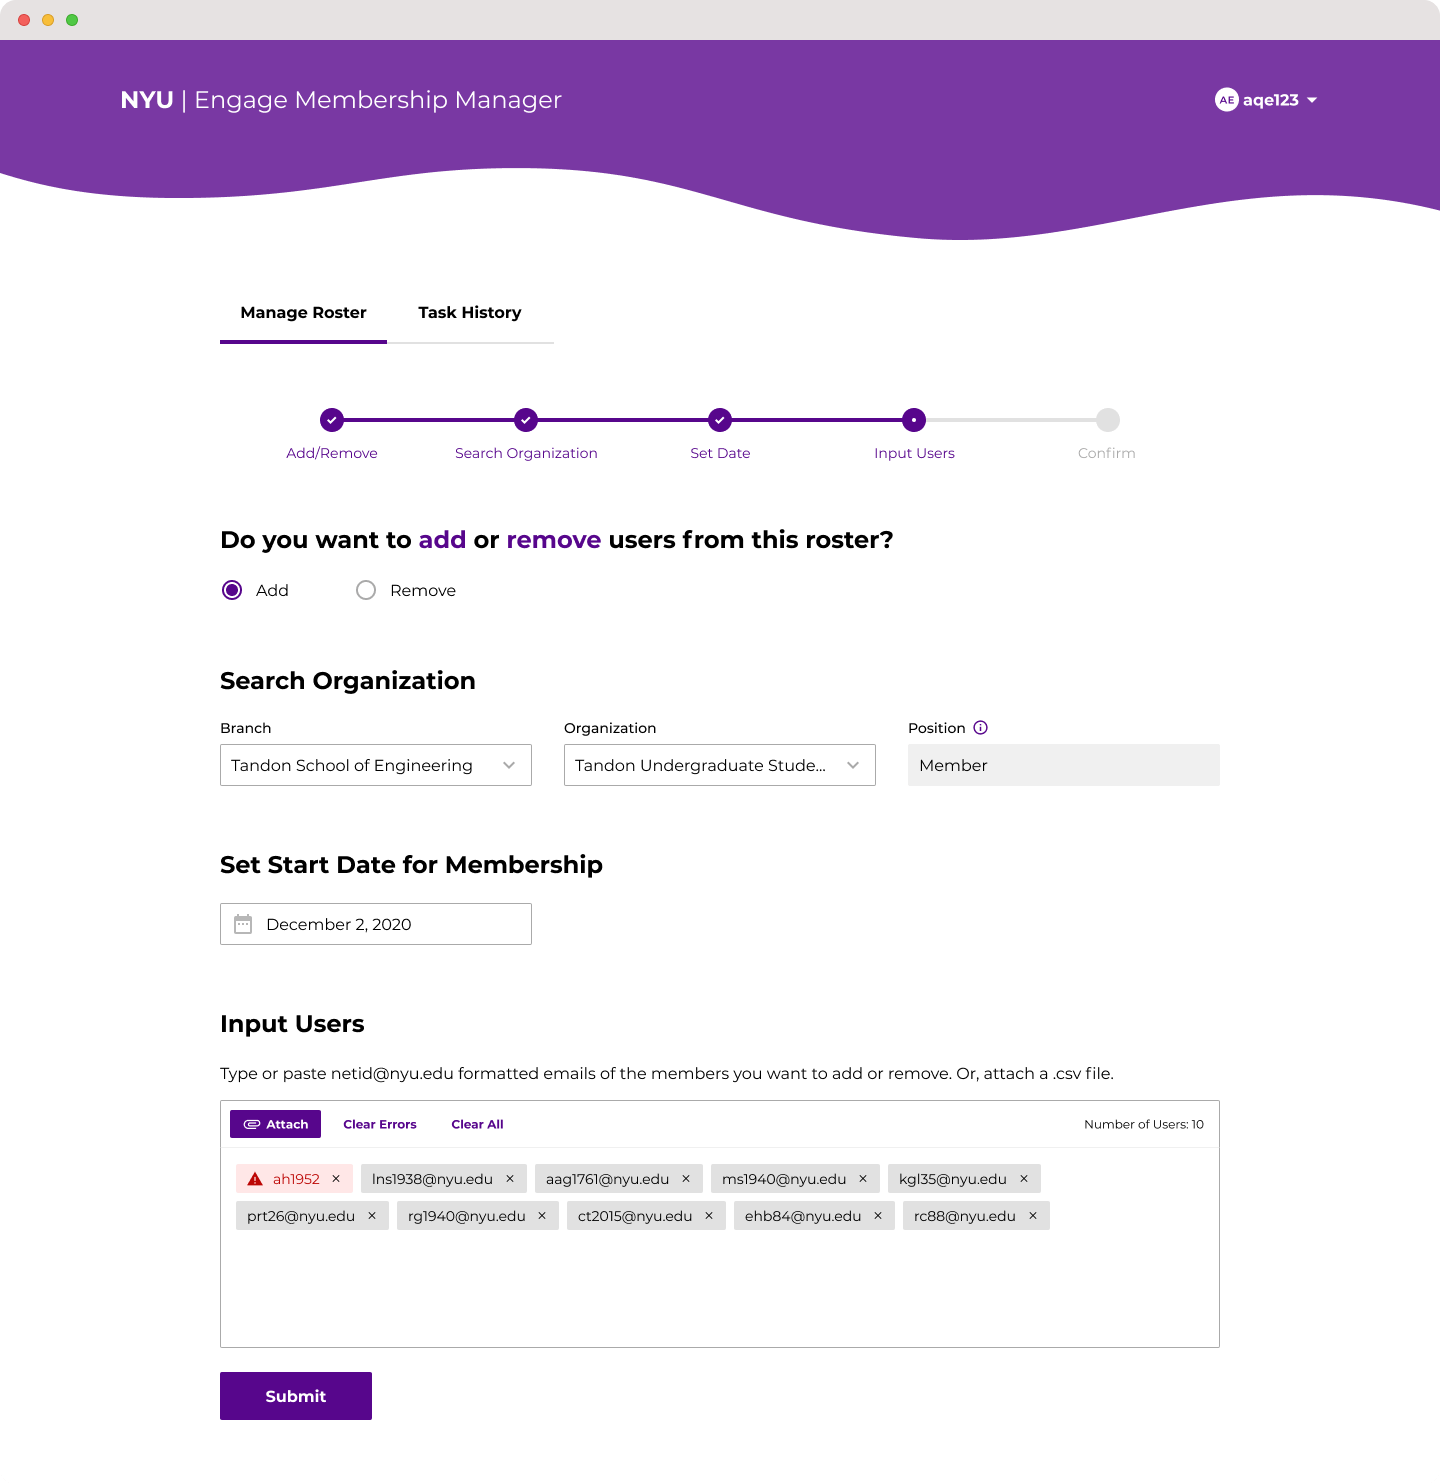 Error case where an email doesn't have a domain name